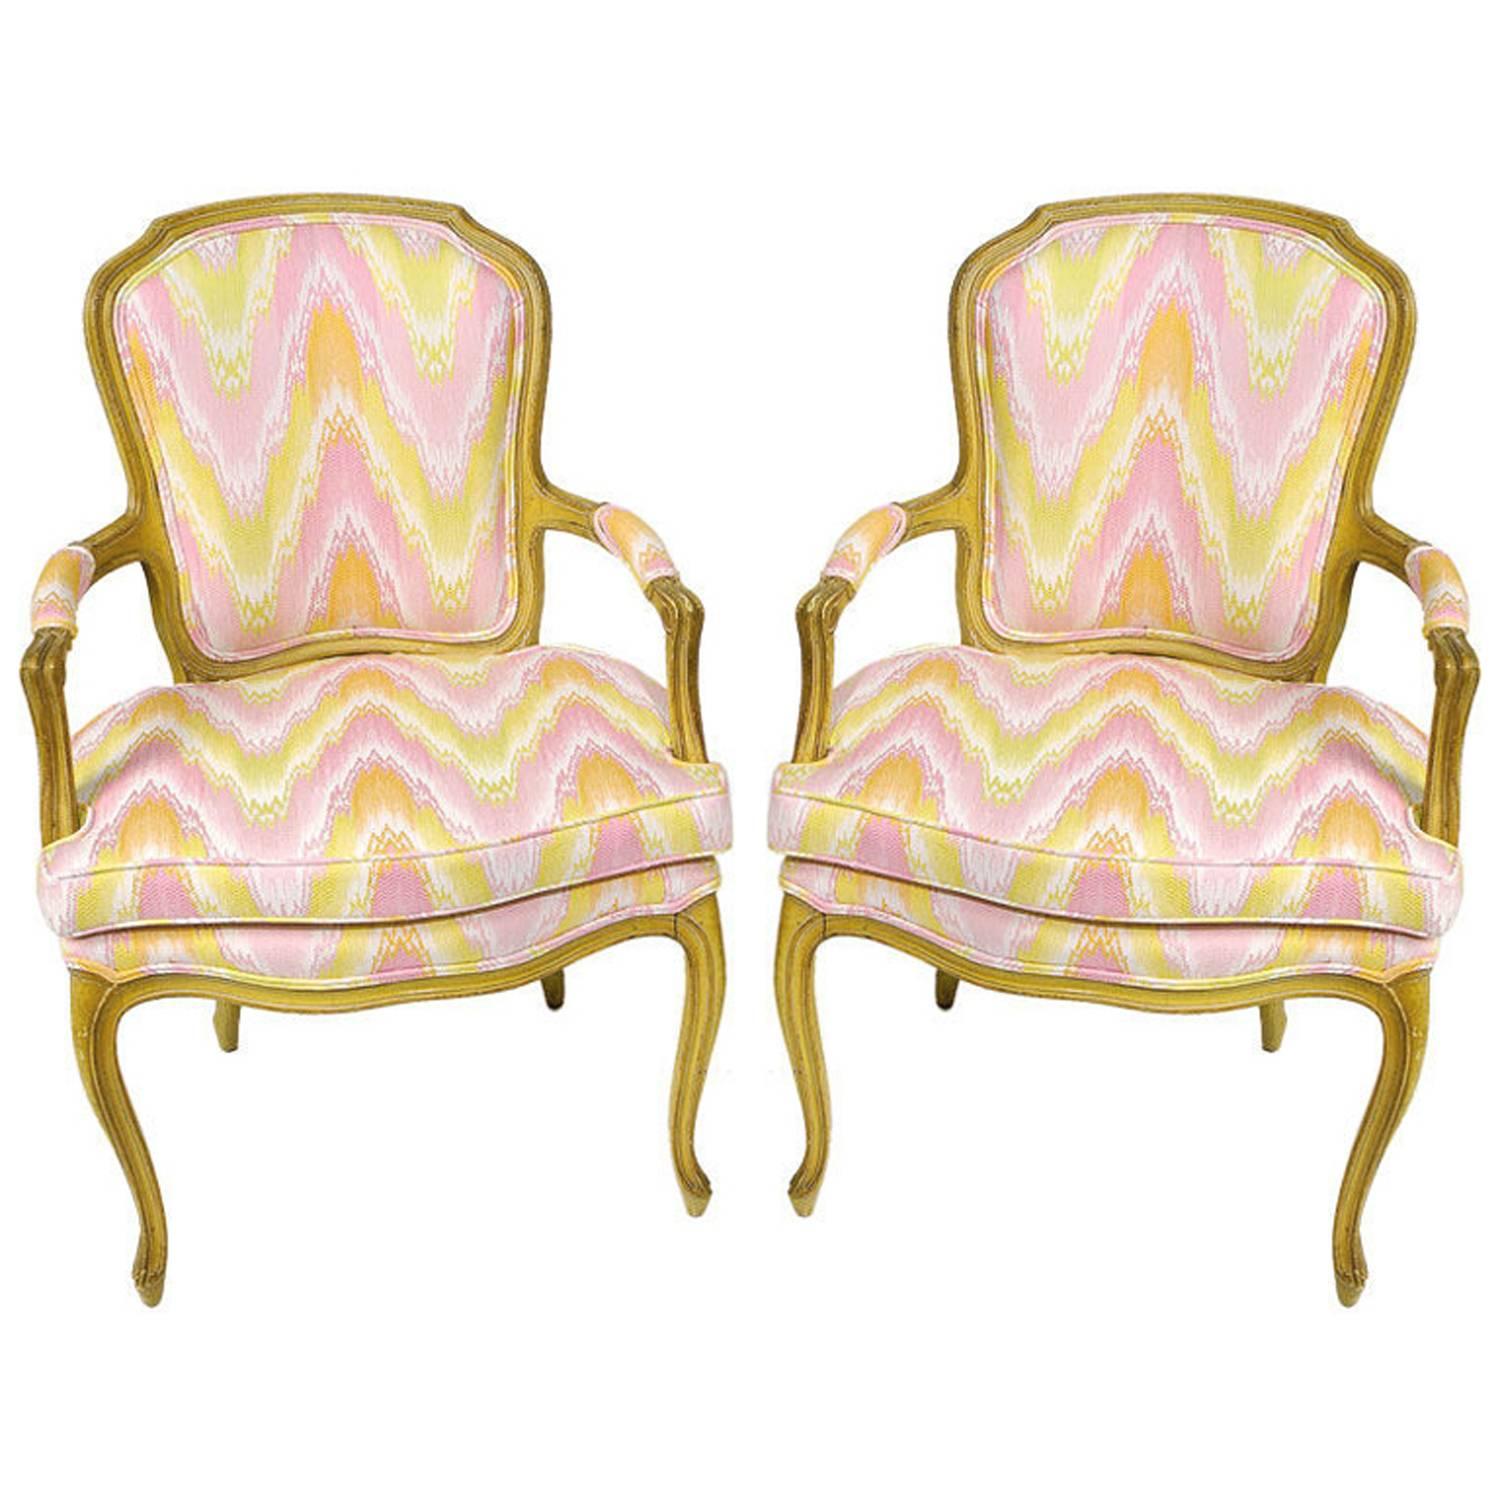 Pair of 1940s Louis XV Style Fauteuils in Colorful New Flamestitch Upholstery